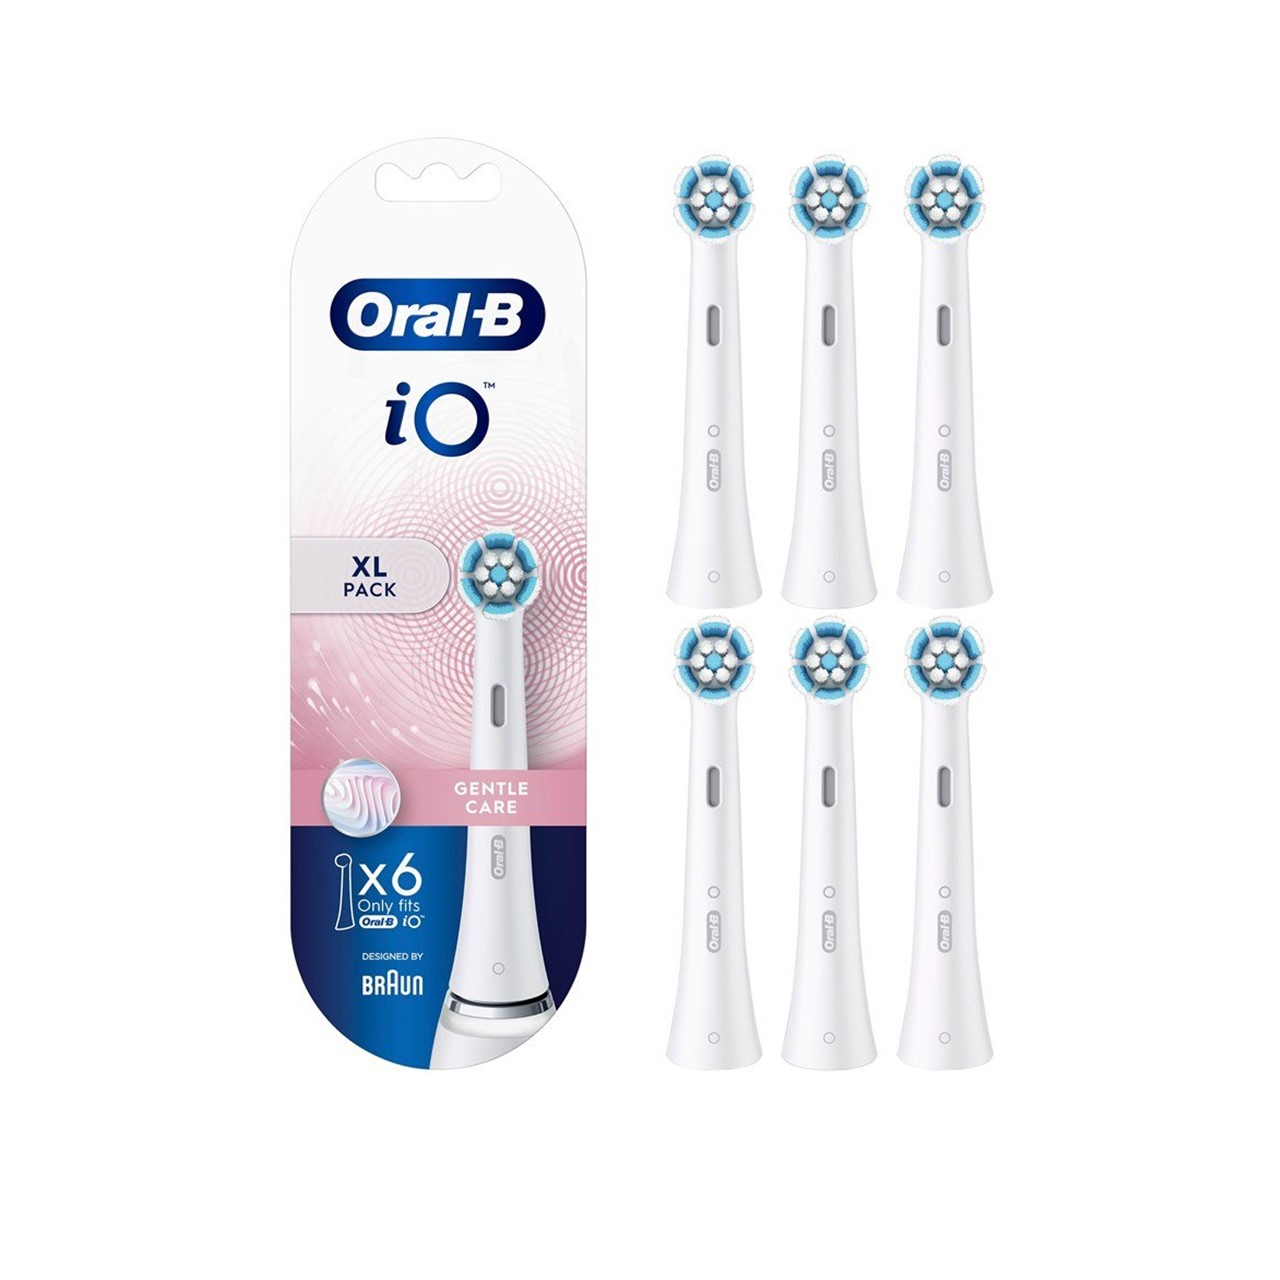 Oral-B iO Gentle Care Replacement Head Electric Toothbrush White x6